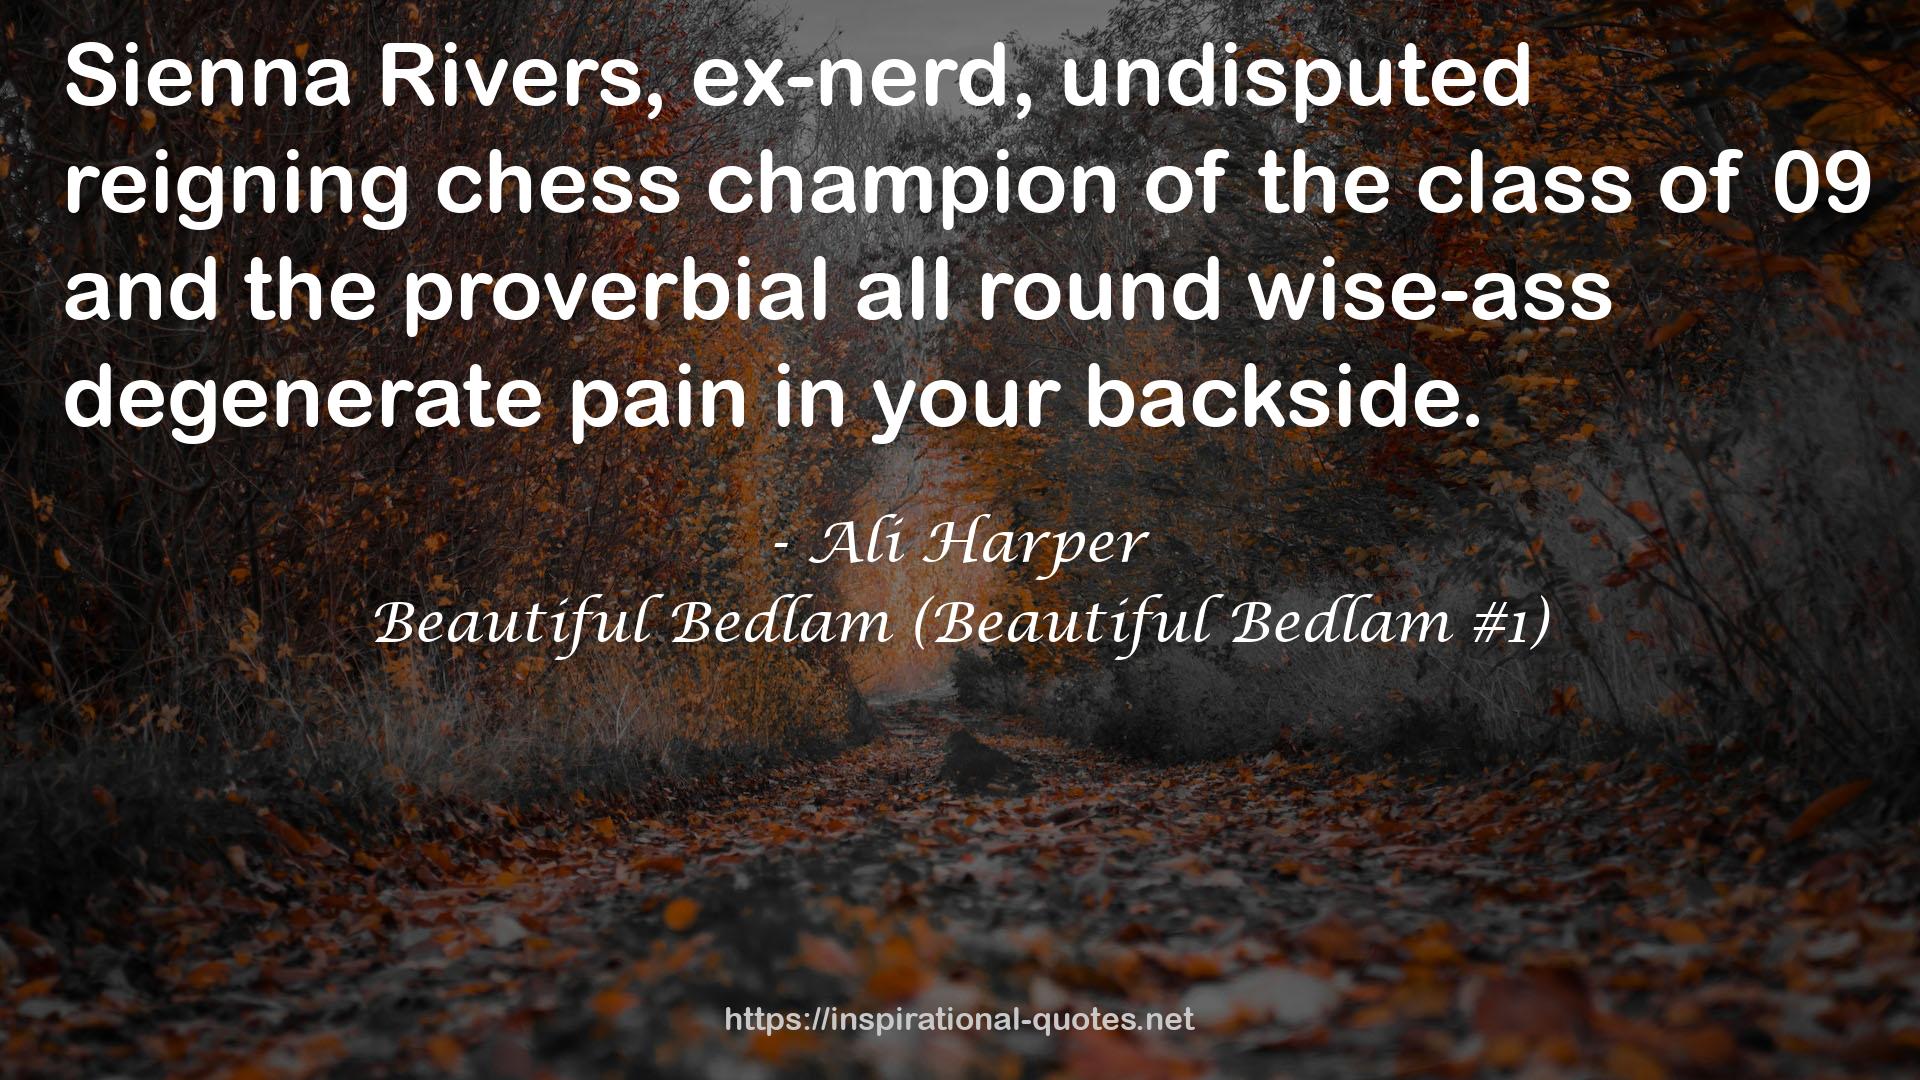 undisputed reigning chess champion  QUOTES